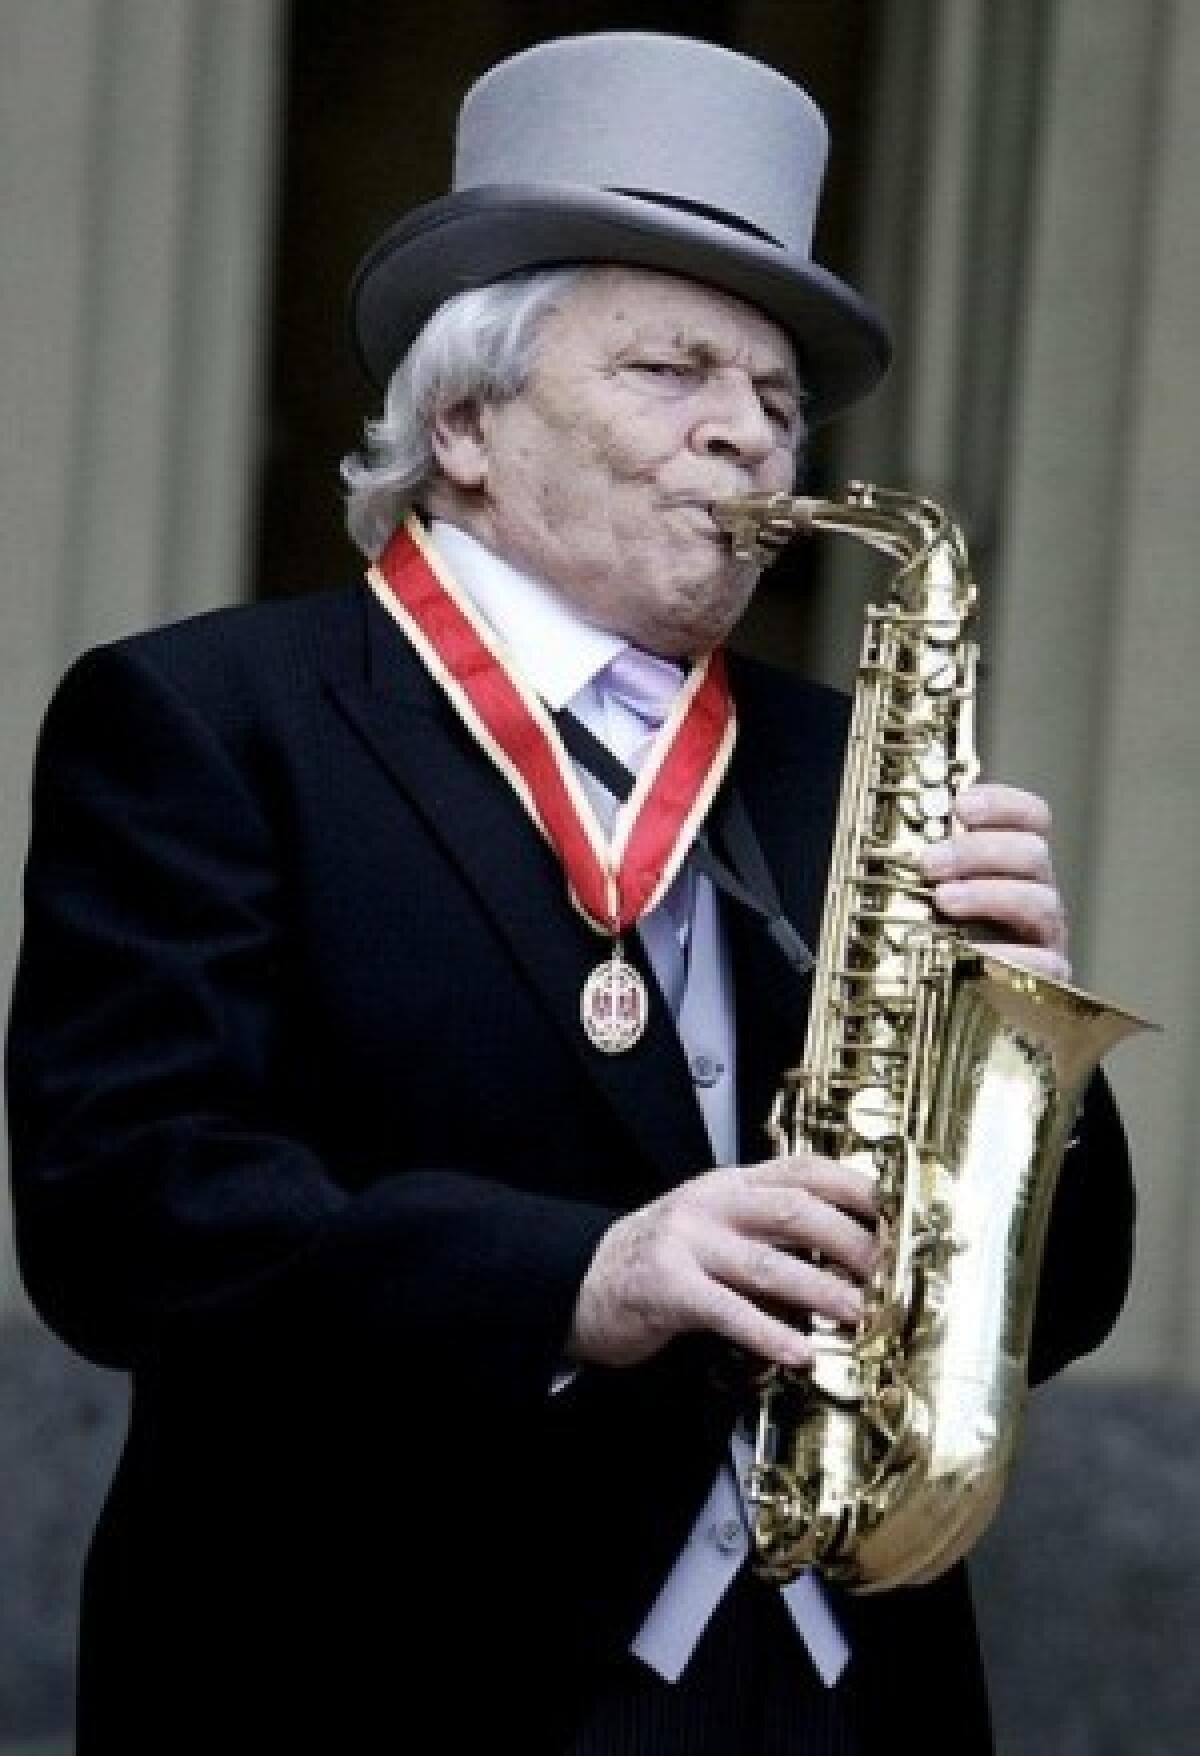 John Dankworth plays his saxophone at Buckingham Palace in 2006 after receiving a knighthood from Queen Elizabeth II.